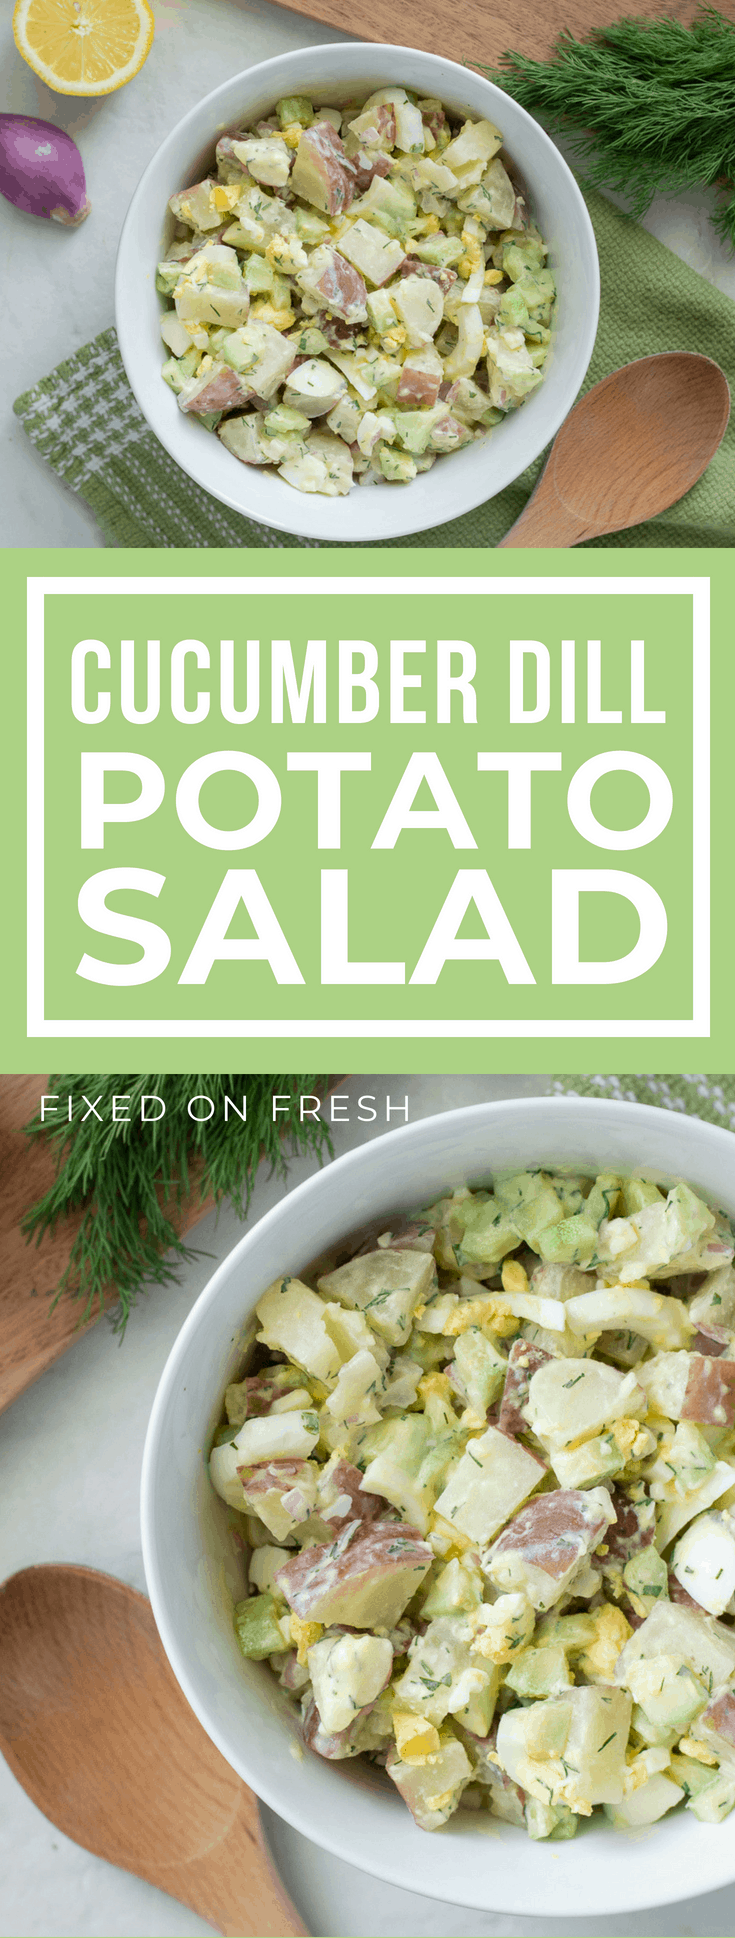 Cucumber Dill Potato salad is a healthier potato salad recipe with a greek yogurt base to lower the calories. It's a great side dish for summer parties. #healthyrecipe #potatosalad